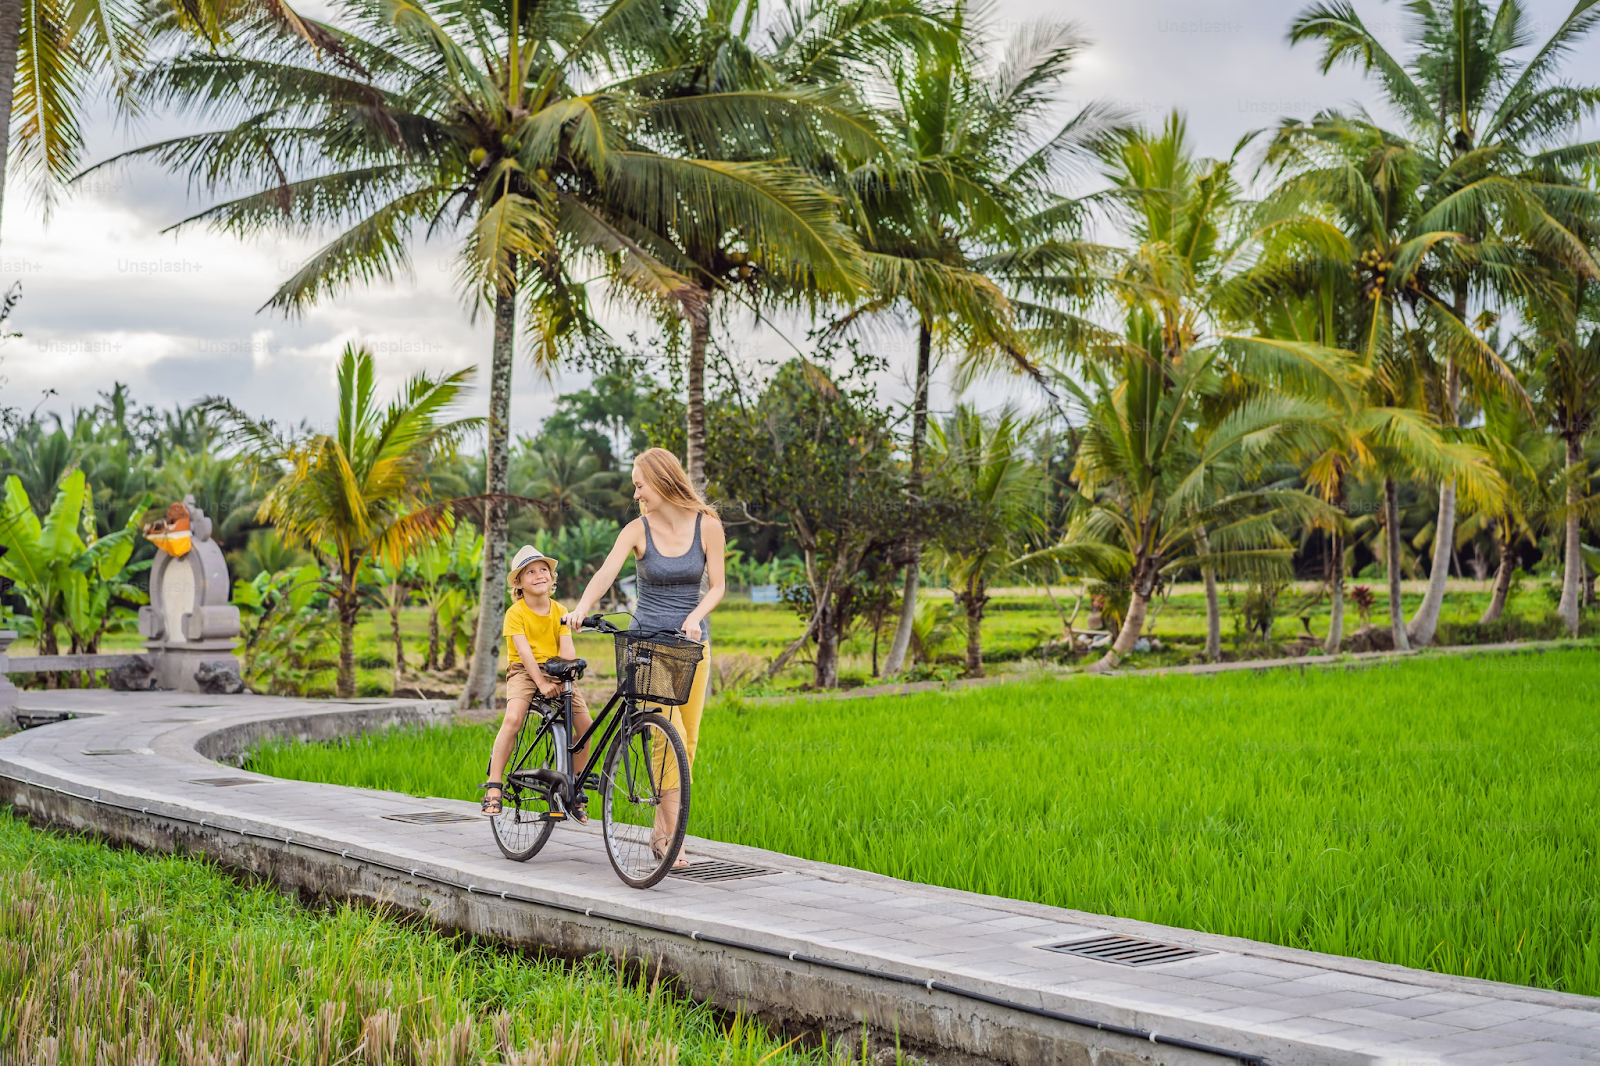 A mother and her young child are riding a bicycle along a scenic path surrounded by lush green rice paddies and palm trees in Bali.